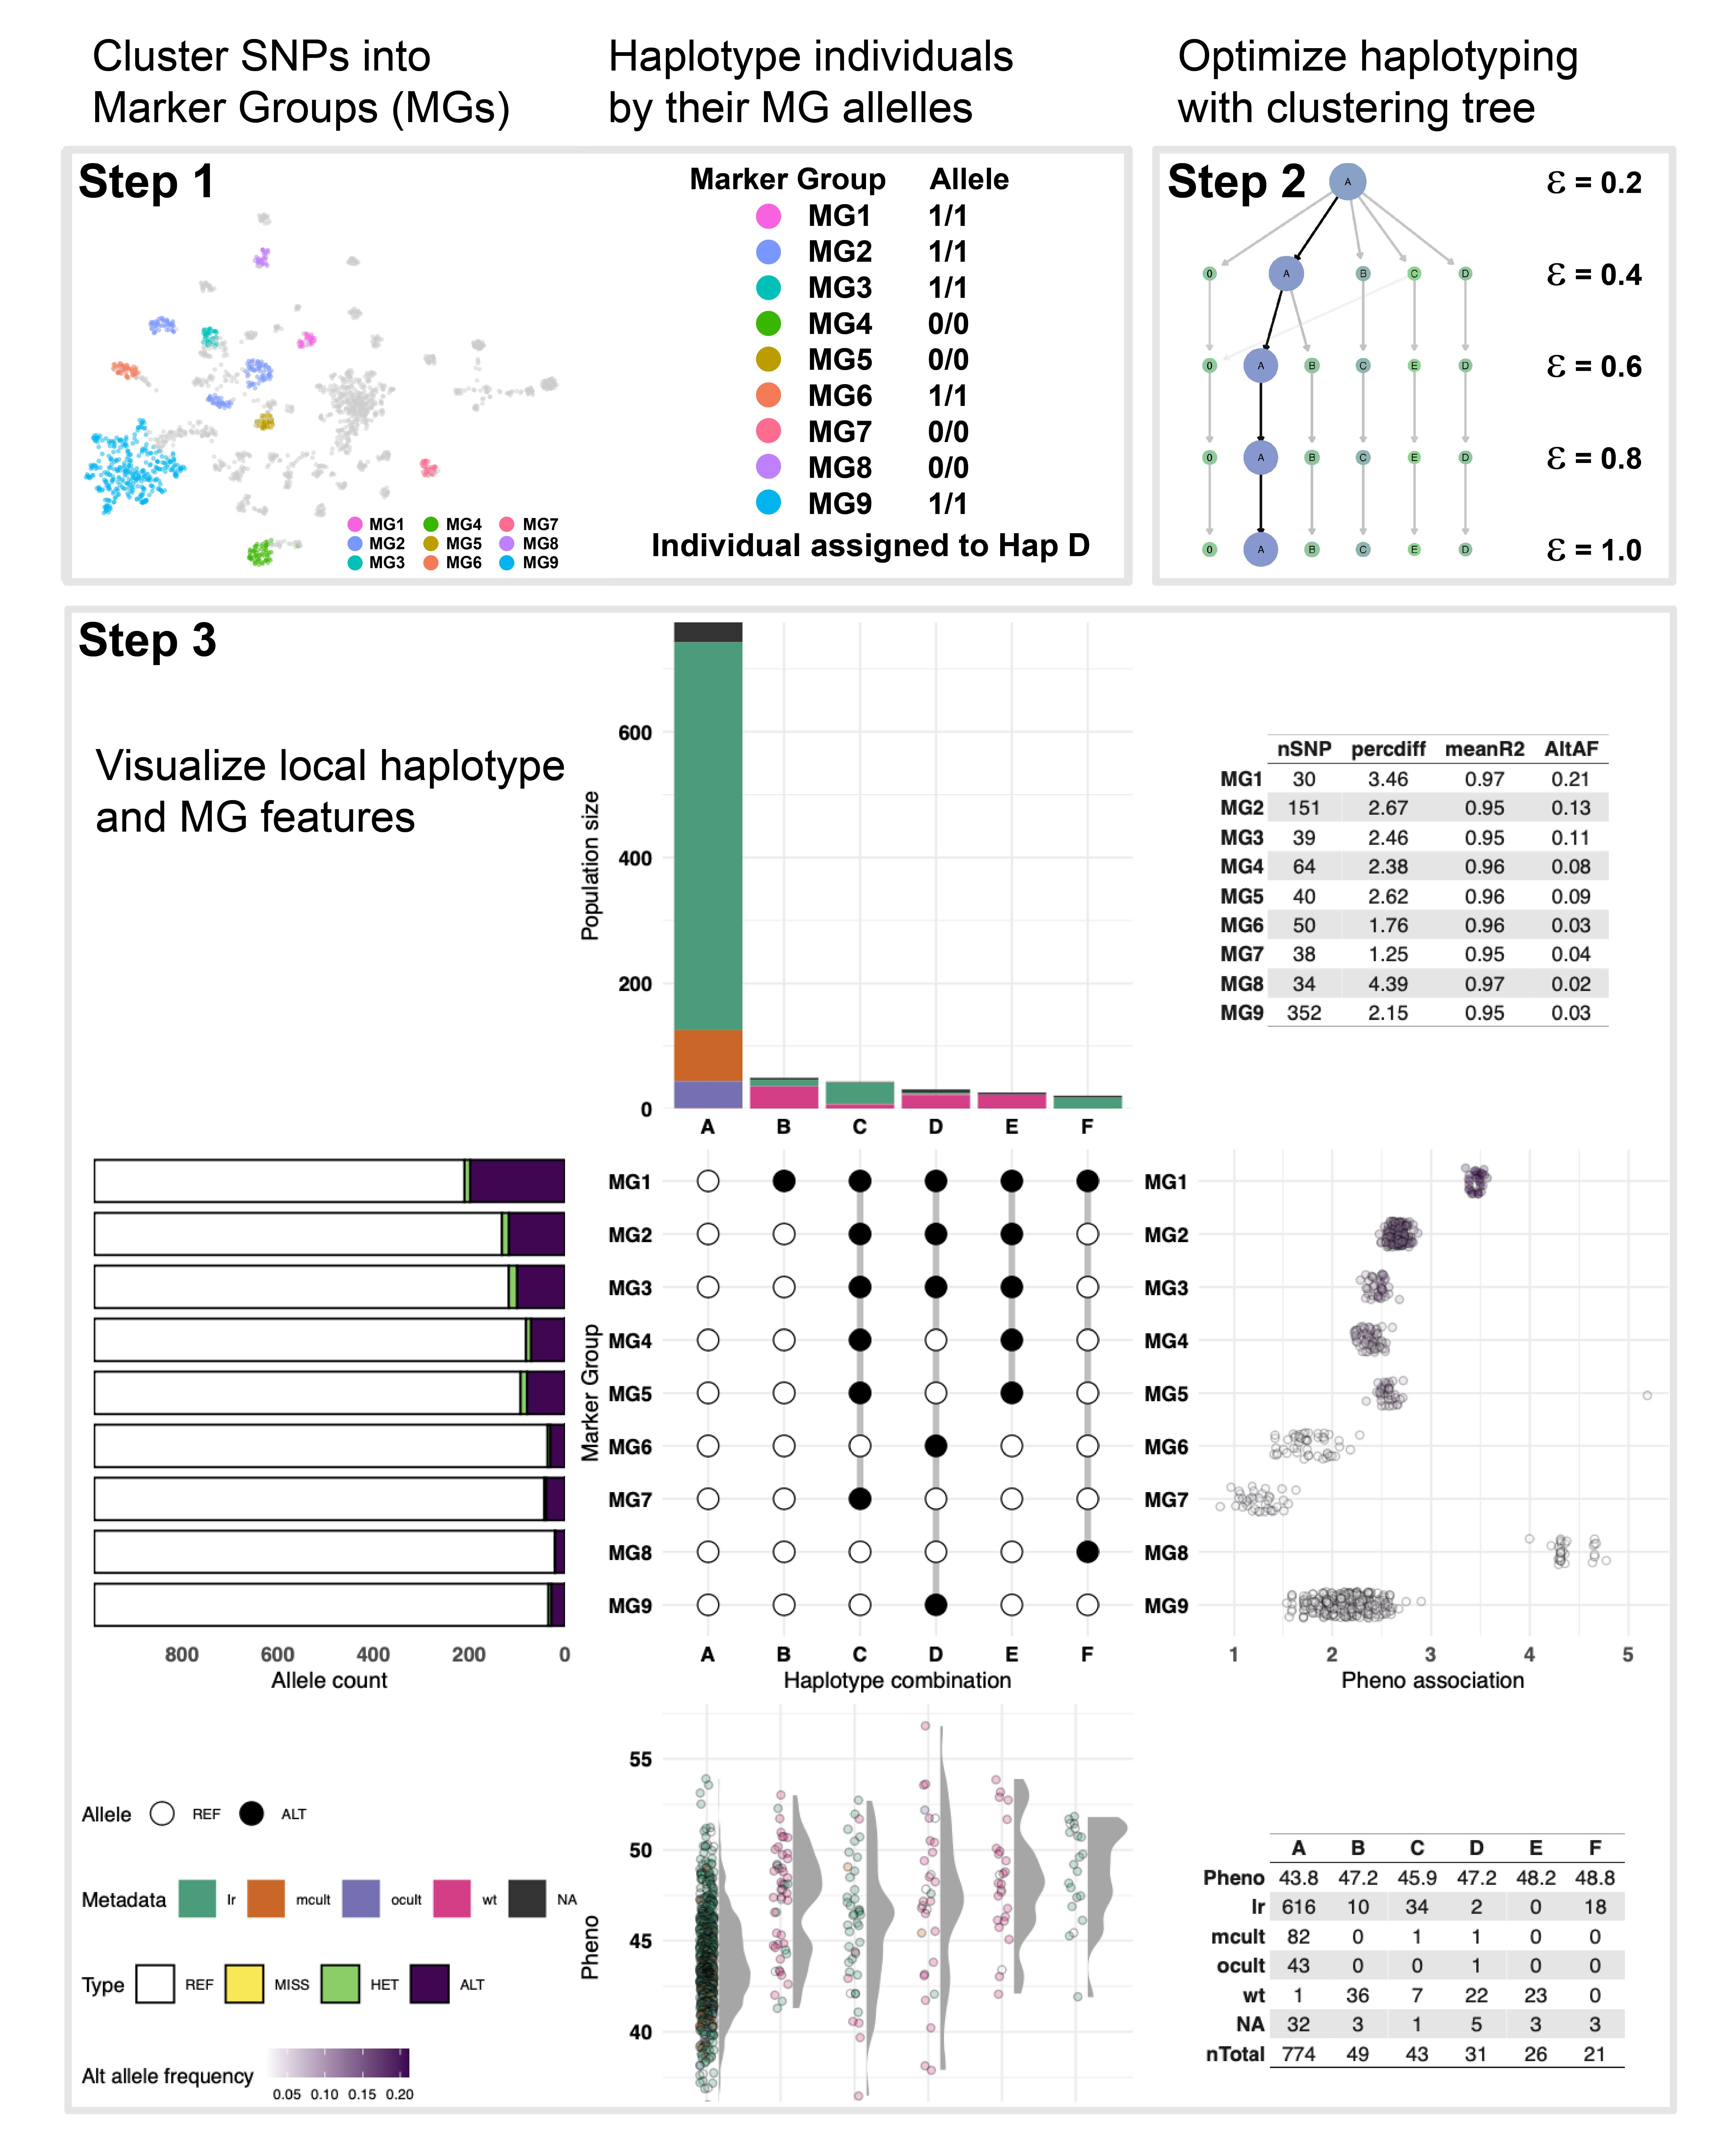 Visualization of haplotypes by marker groups